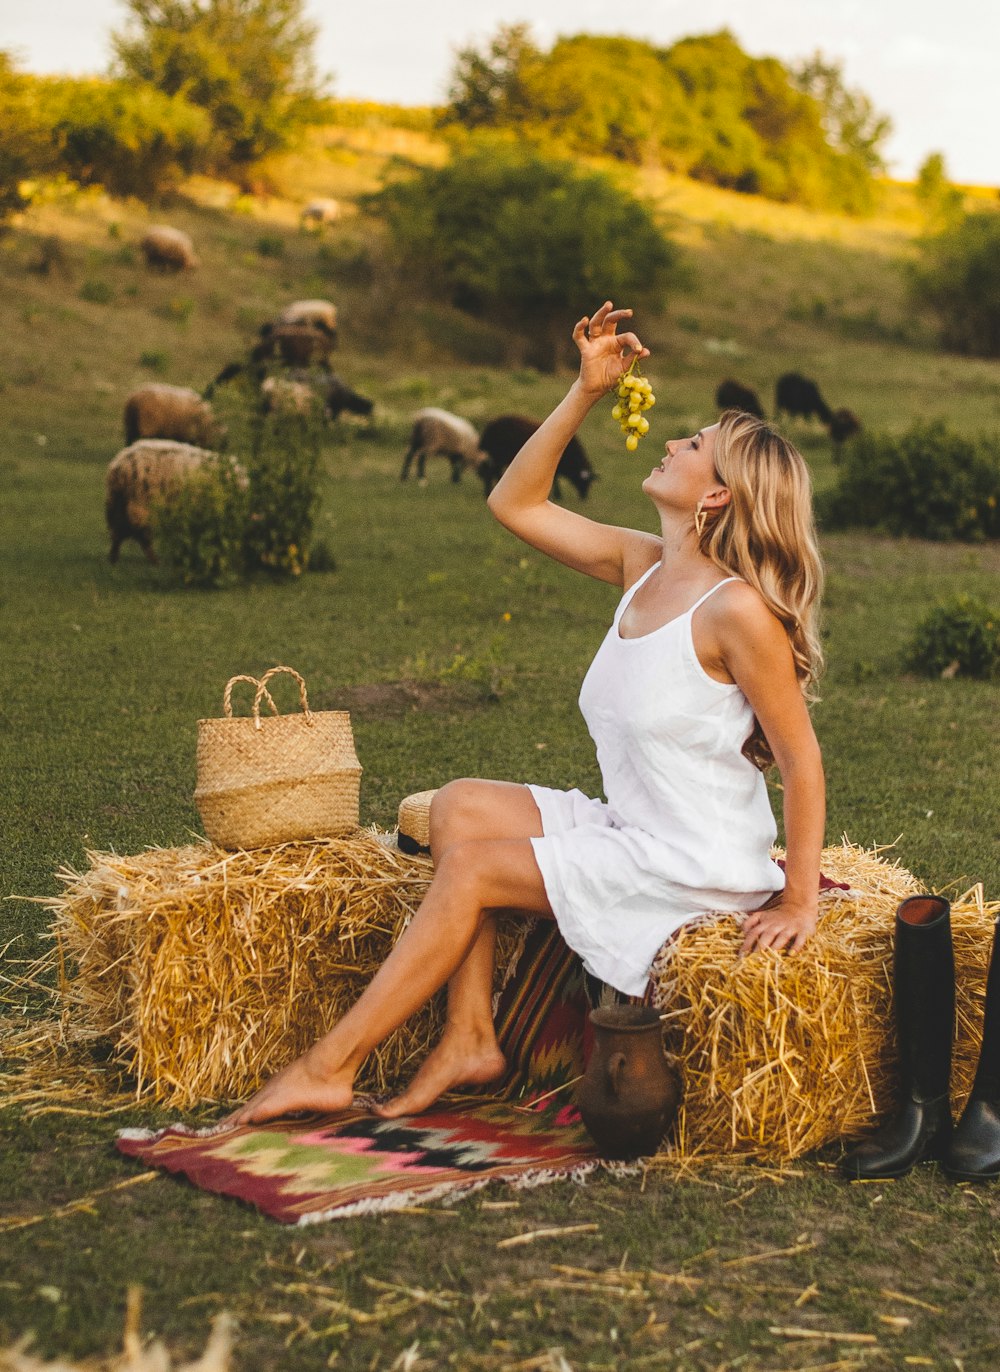 woman in white tank top sitting on brown hay